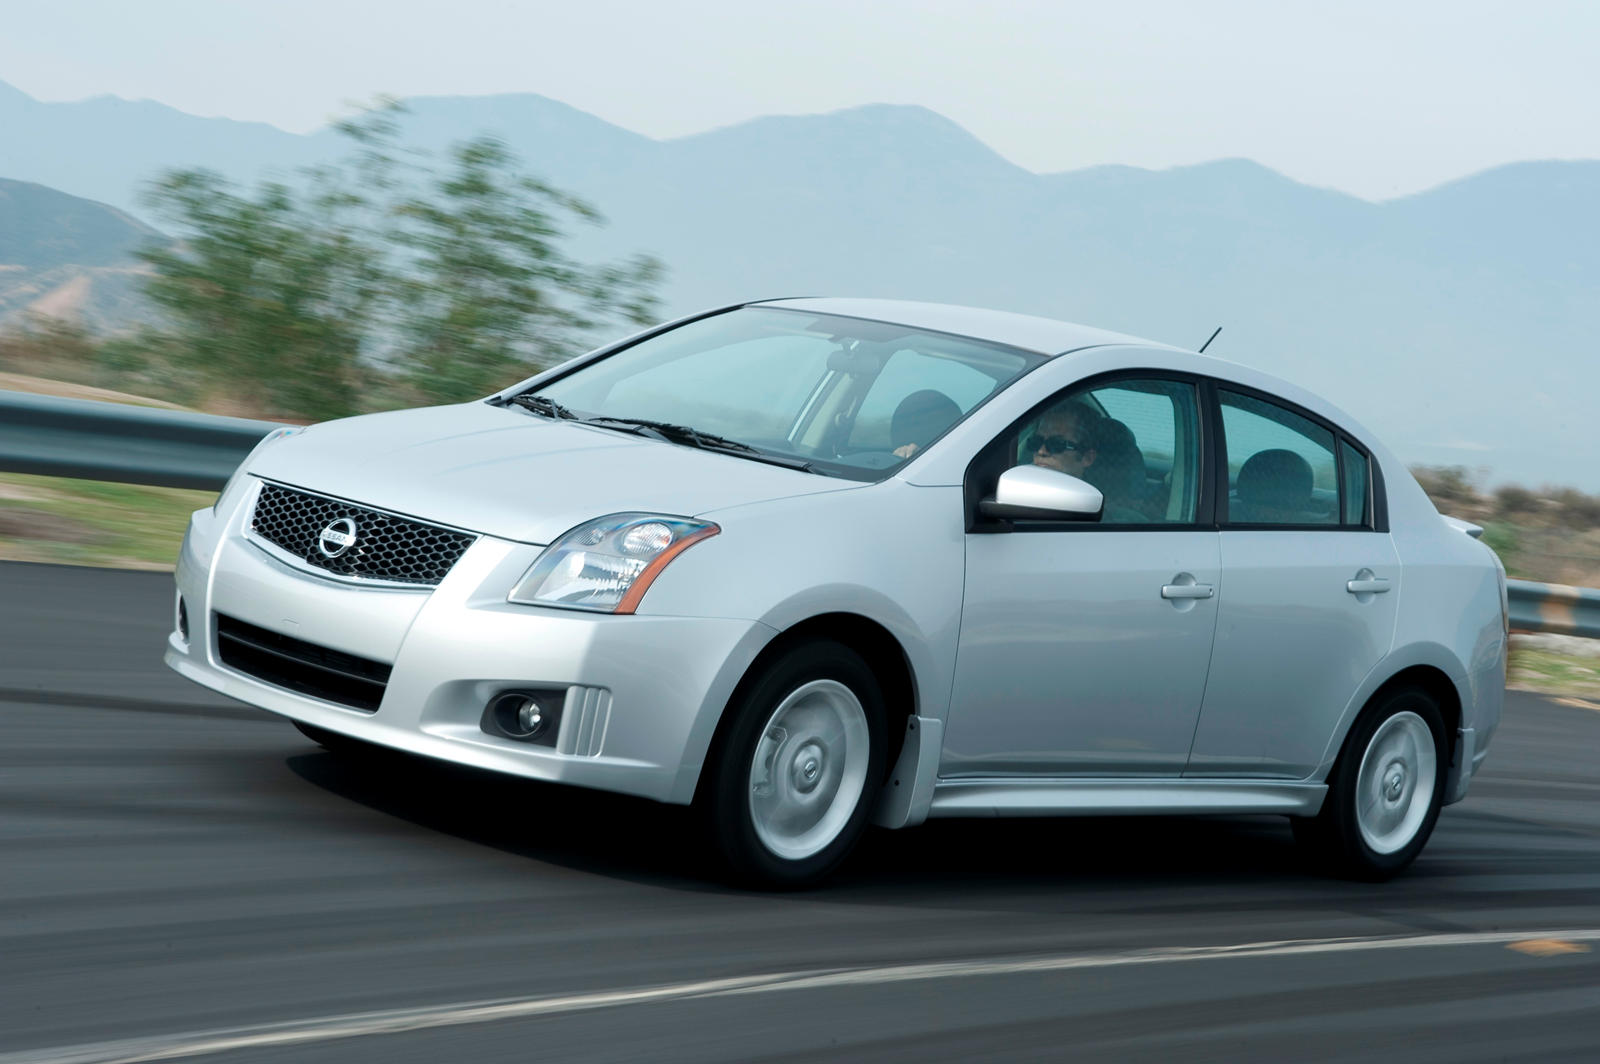 2009 Nissan Sentra Front View Driving